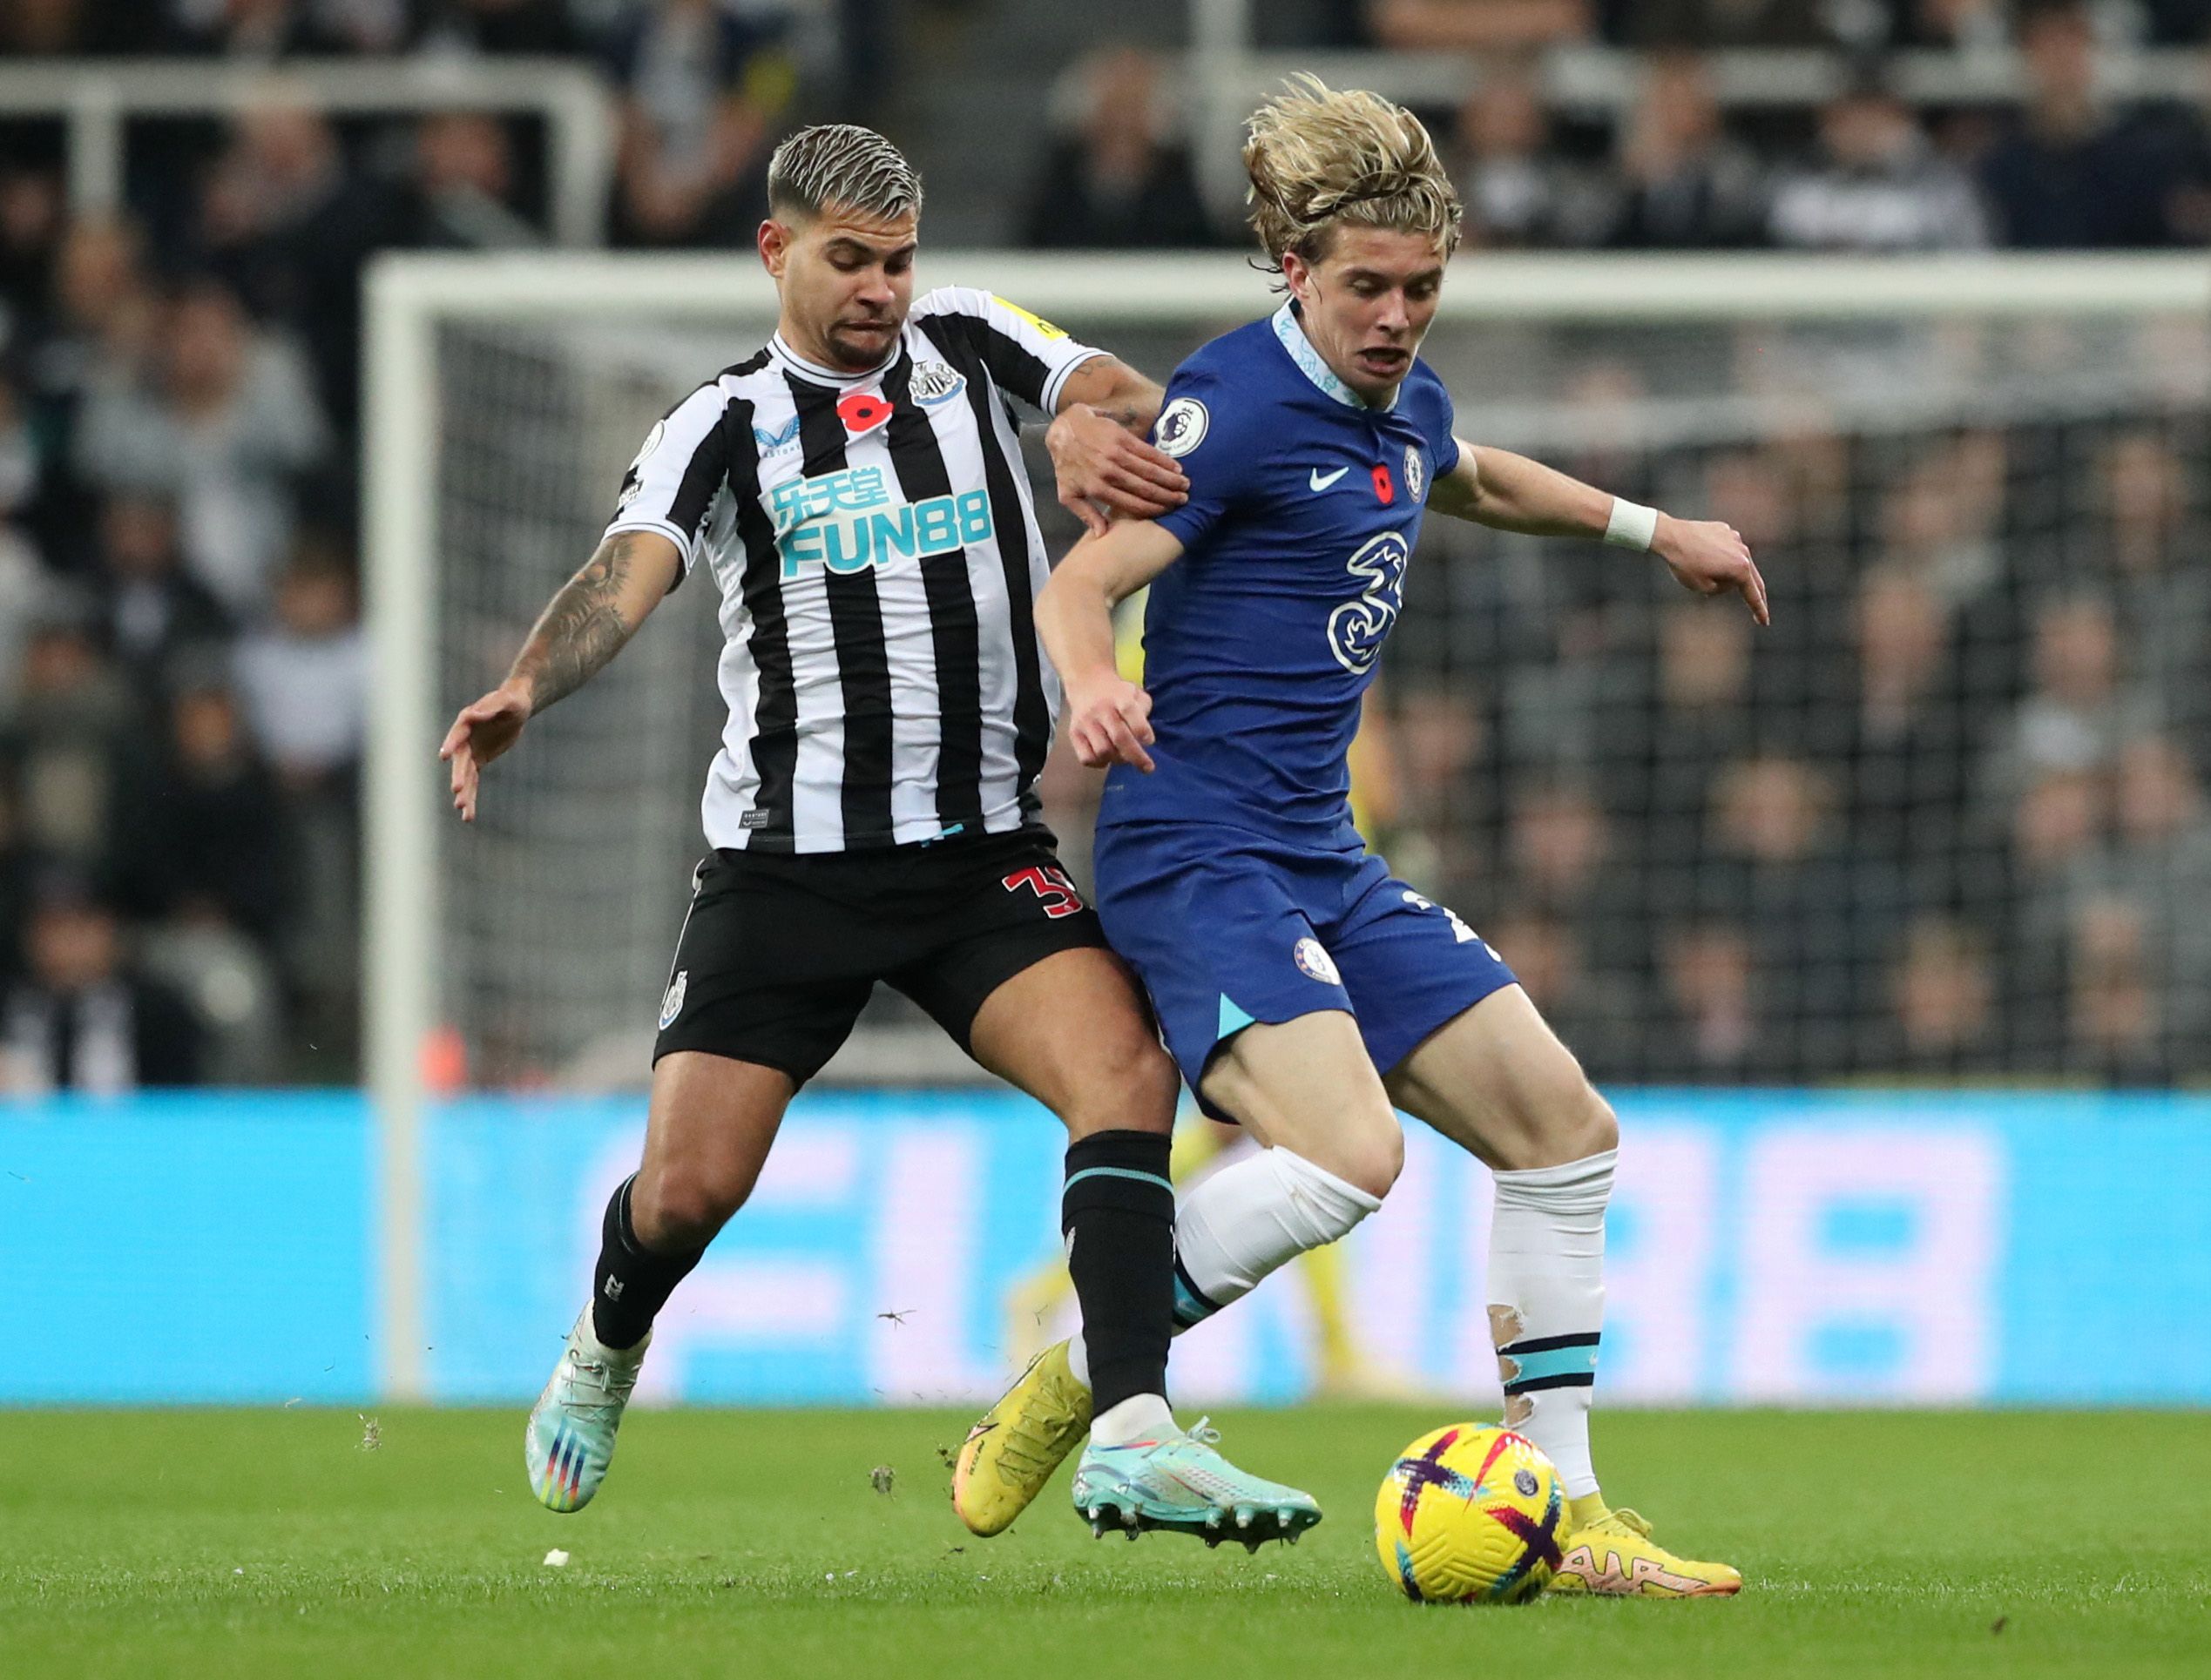 Soccer Football - Premier League - Newcastle United v Chelsea - St James' Park, Newcastle, Britain - November 12, 2022 Newcastle United's Bruno Guimaraes in action with Chelsea's Conor Gallagher REUTERS/Scott Heppell EDITORIAL USE ONLY. No use with unauthorized audio, video, data, fixture lists, club/league logos or 'live' services. Online in-match use limited to 75 images, no video emulation. No use in betting, games or single club /league/player publications.  Please contact your account repre